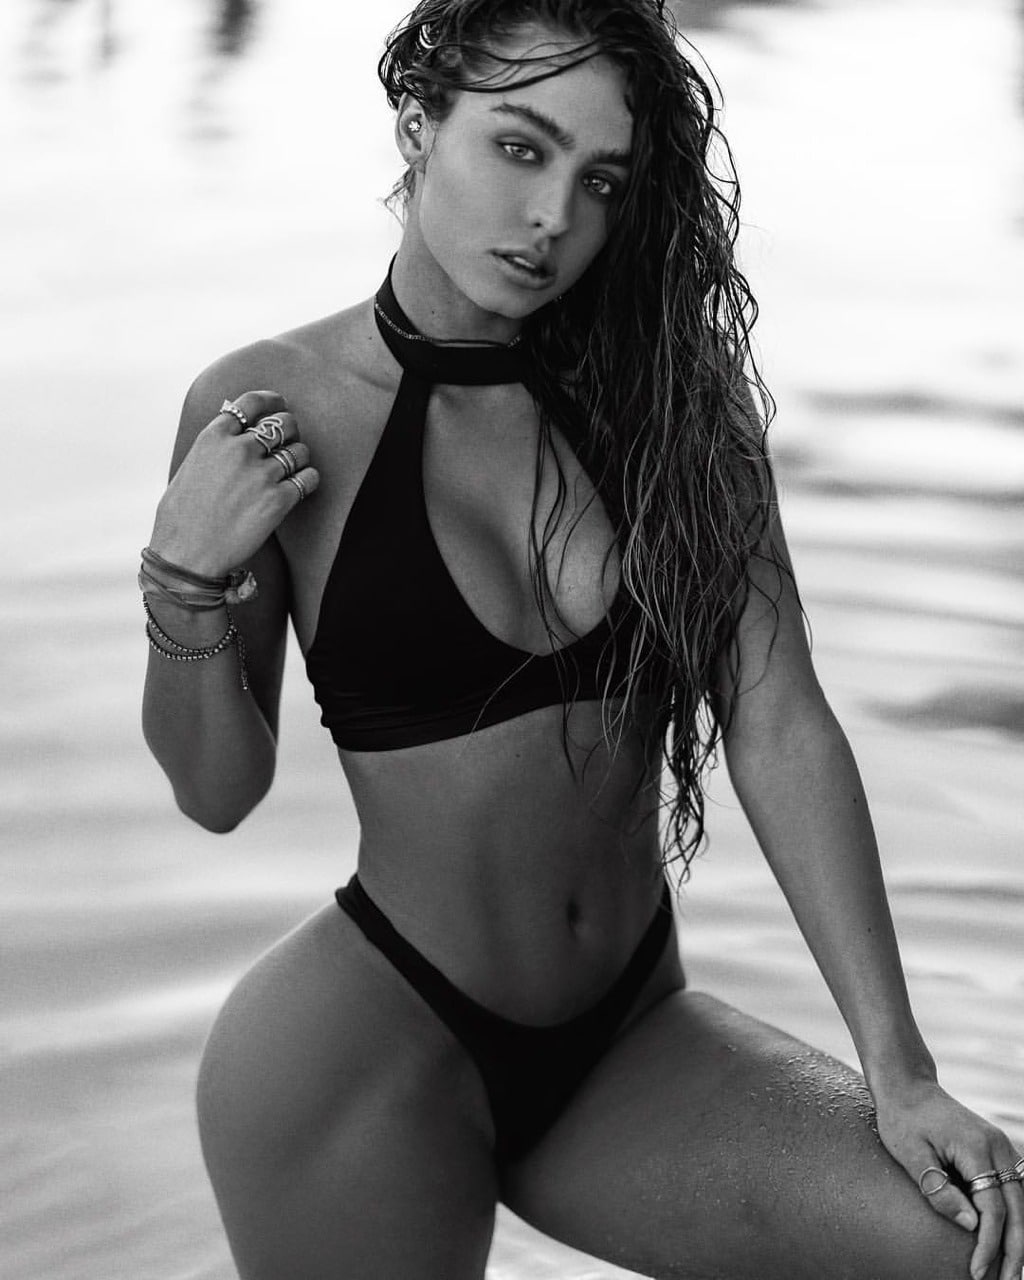 Ray pictures sommer hottest Sommer Ray